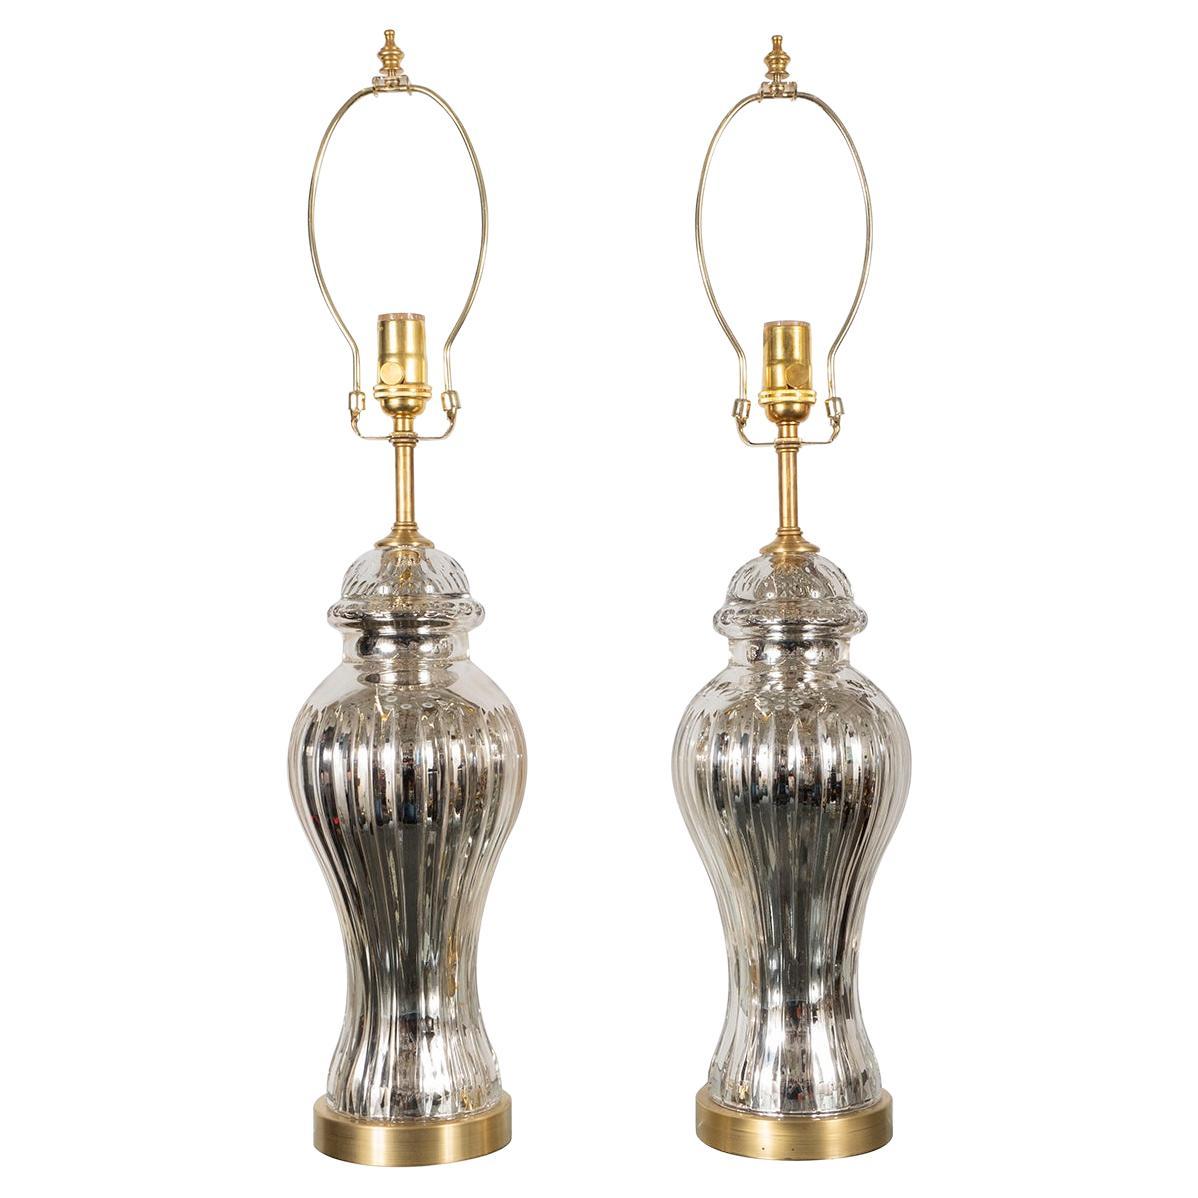 Pair of Fluted Urn-Shaped Mercury Glass Lamps For Sale